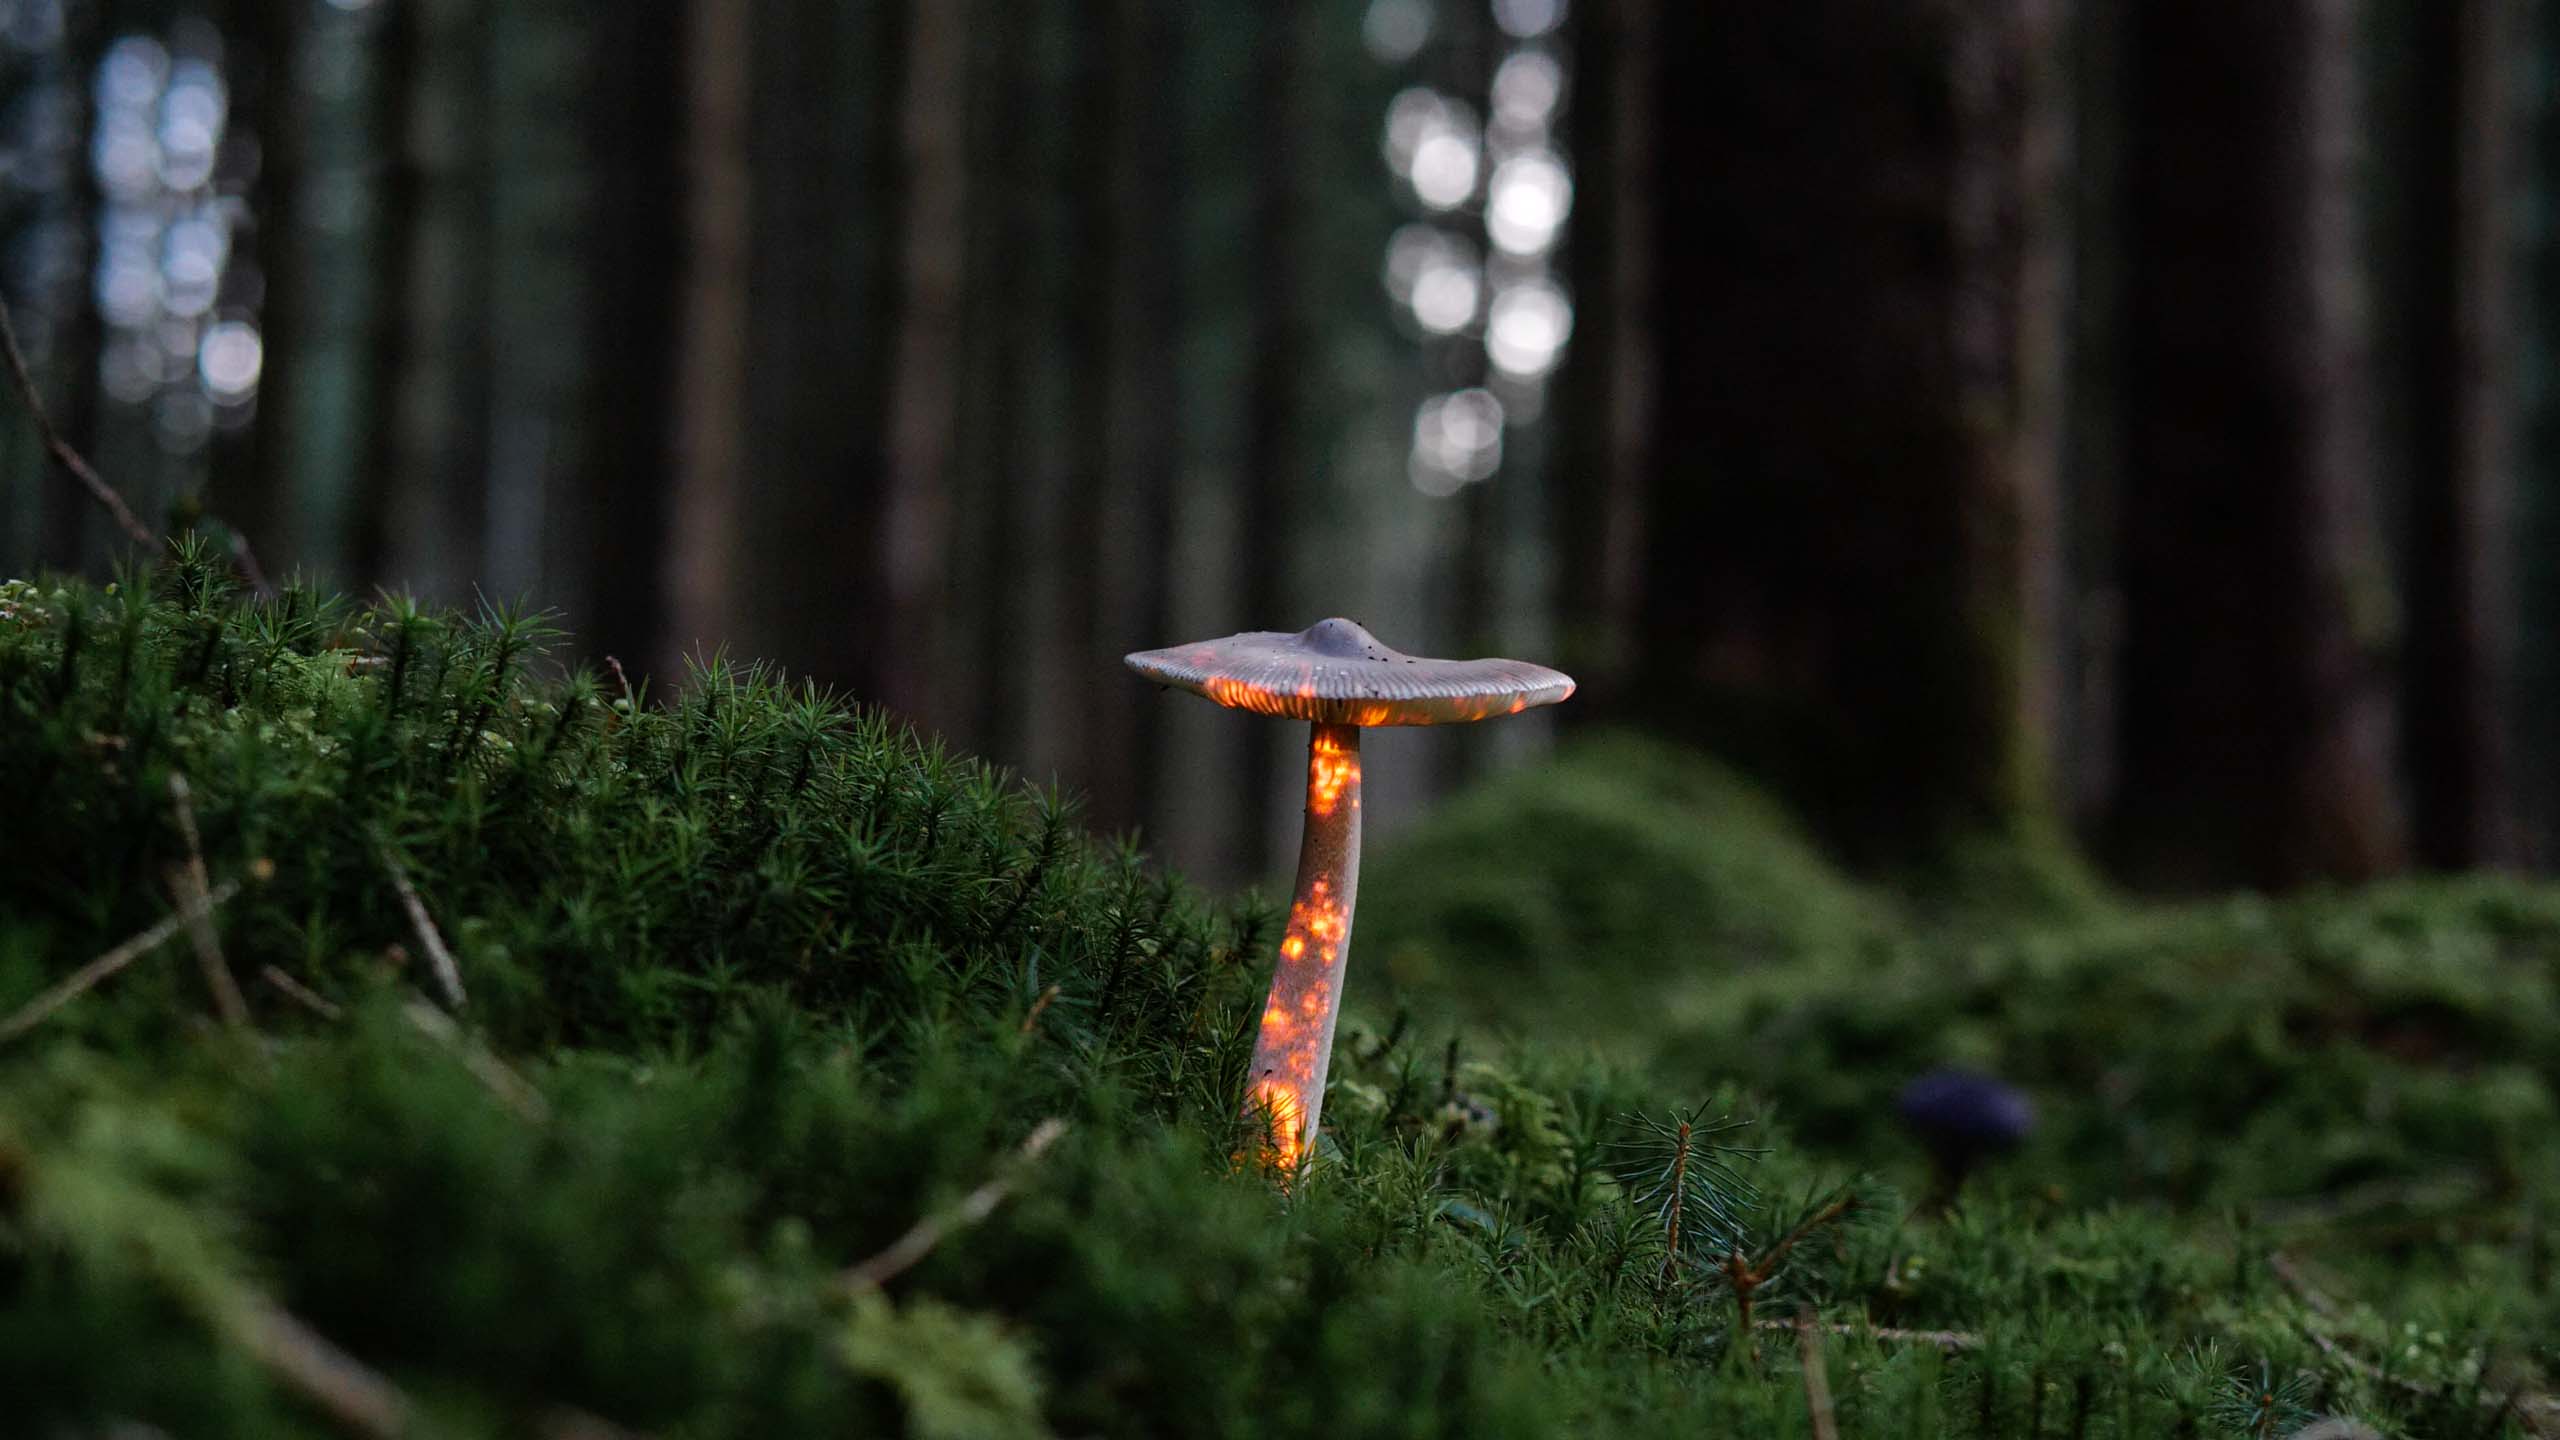 Video light art projected onto a mushroom in a forest with red orange fire visuals